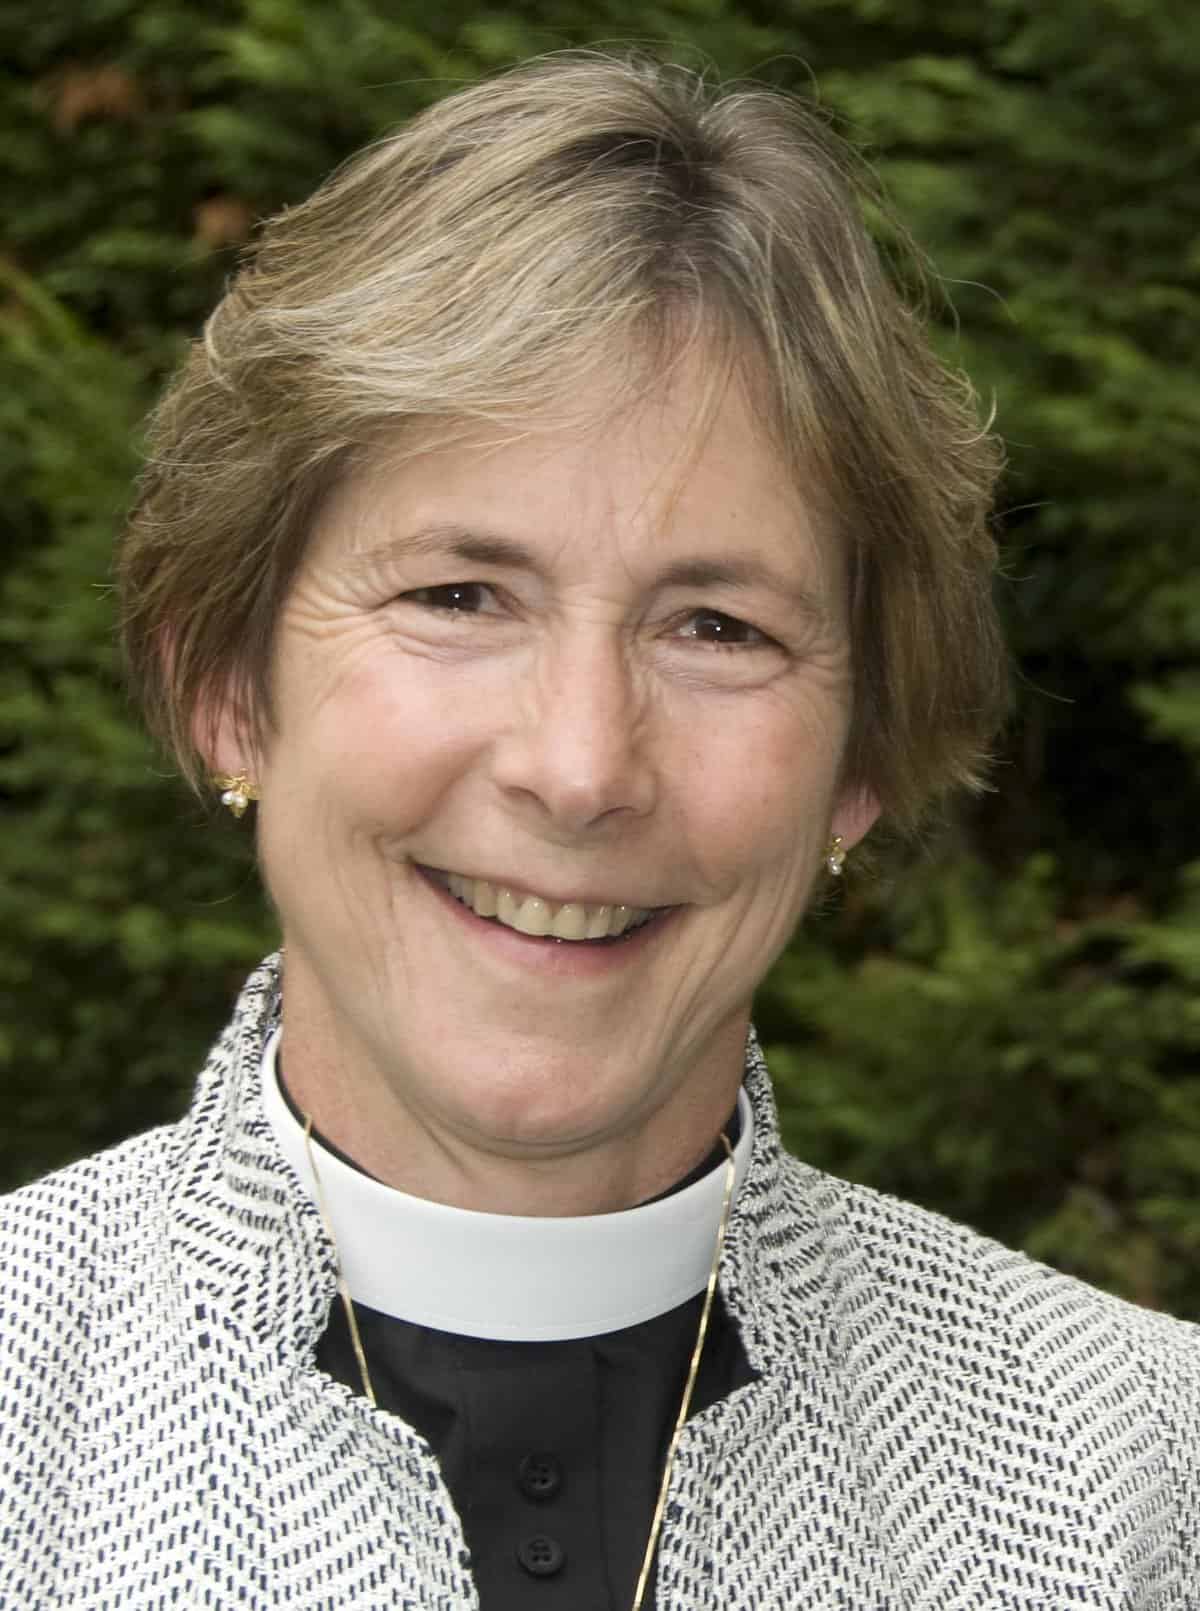 All Saints’ Church in Princeton selects new interim rector